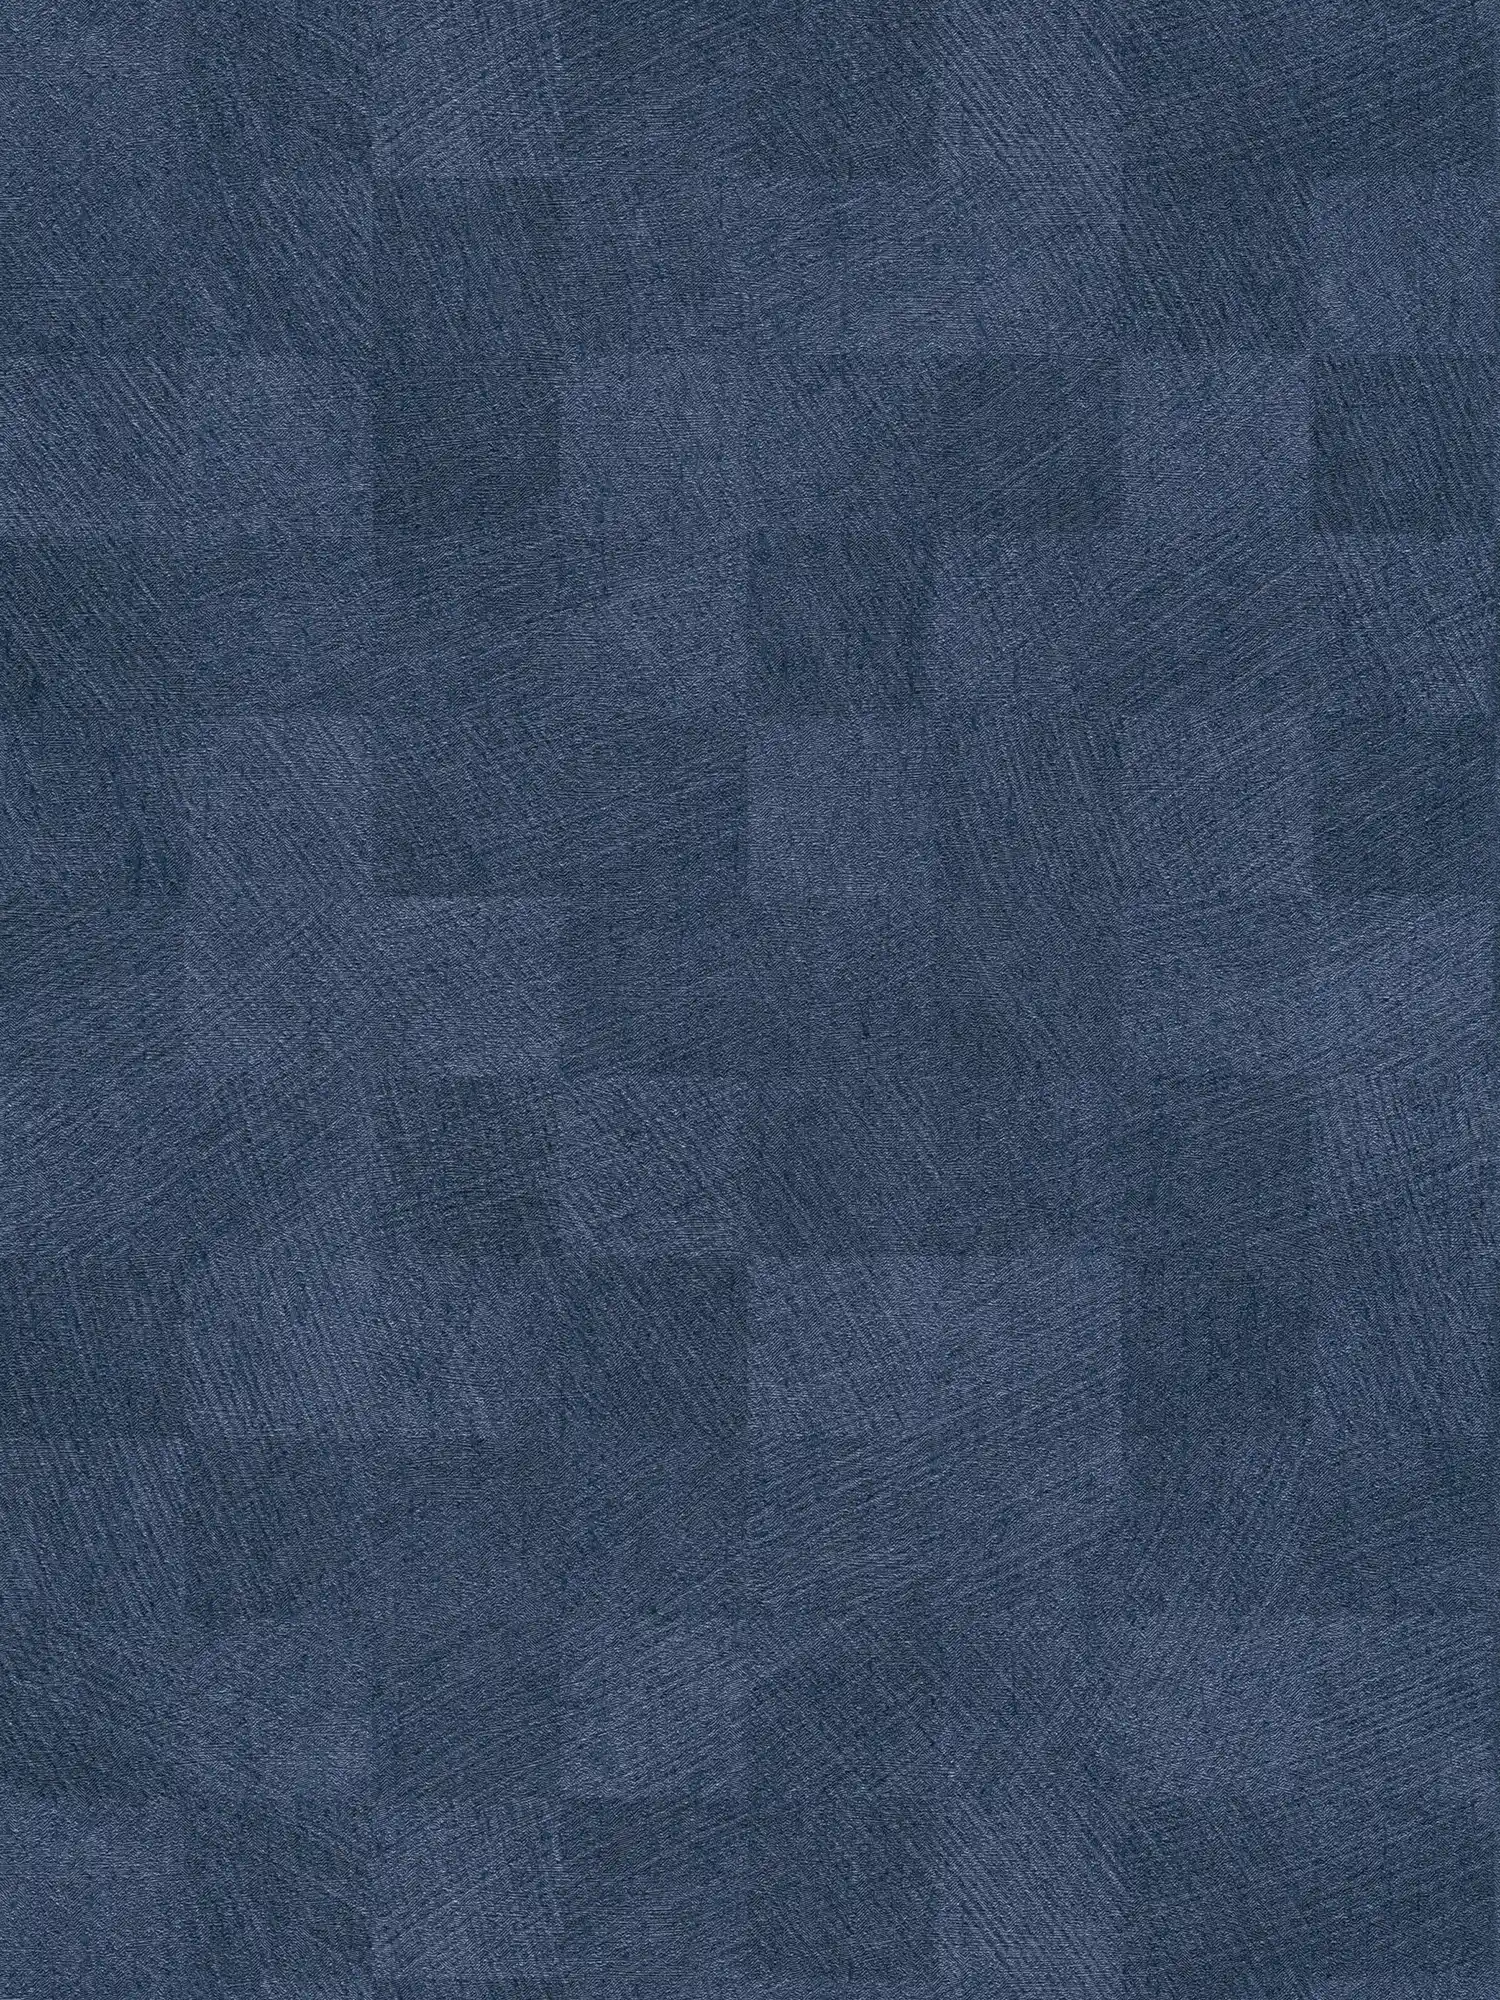 Plaid wallpaper night blue with structure & gloss effect - blue
